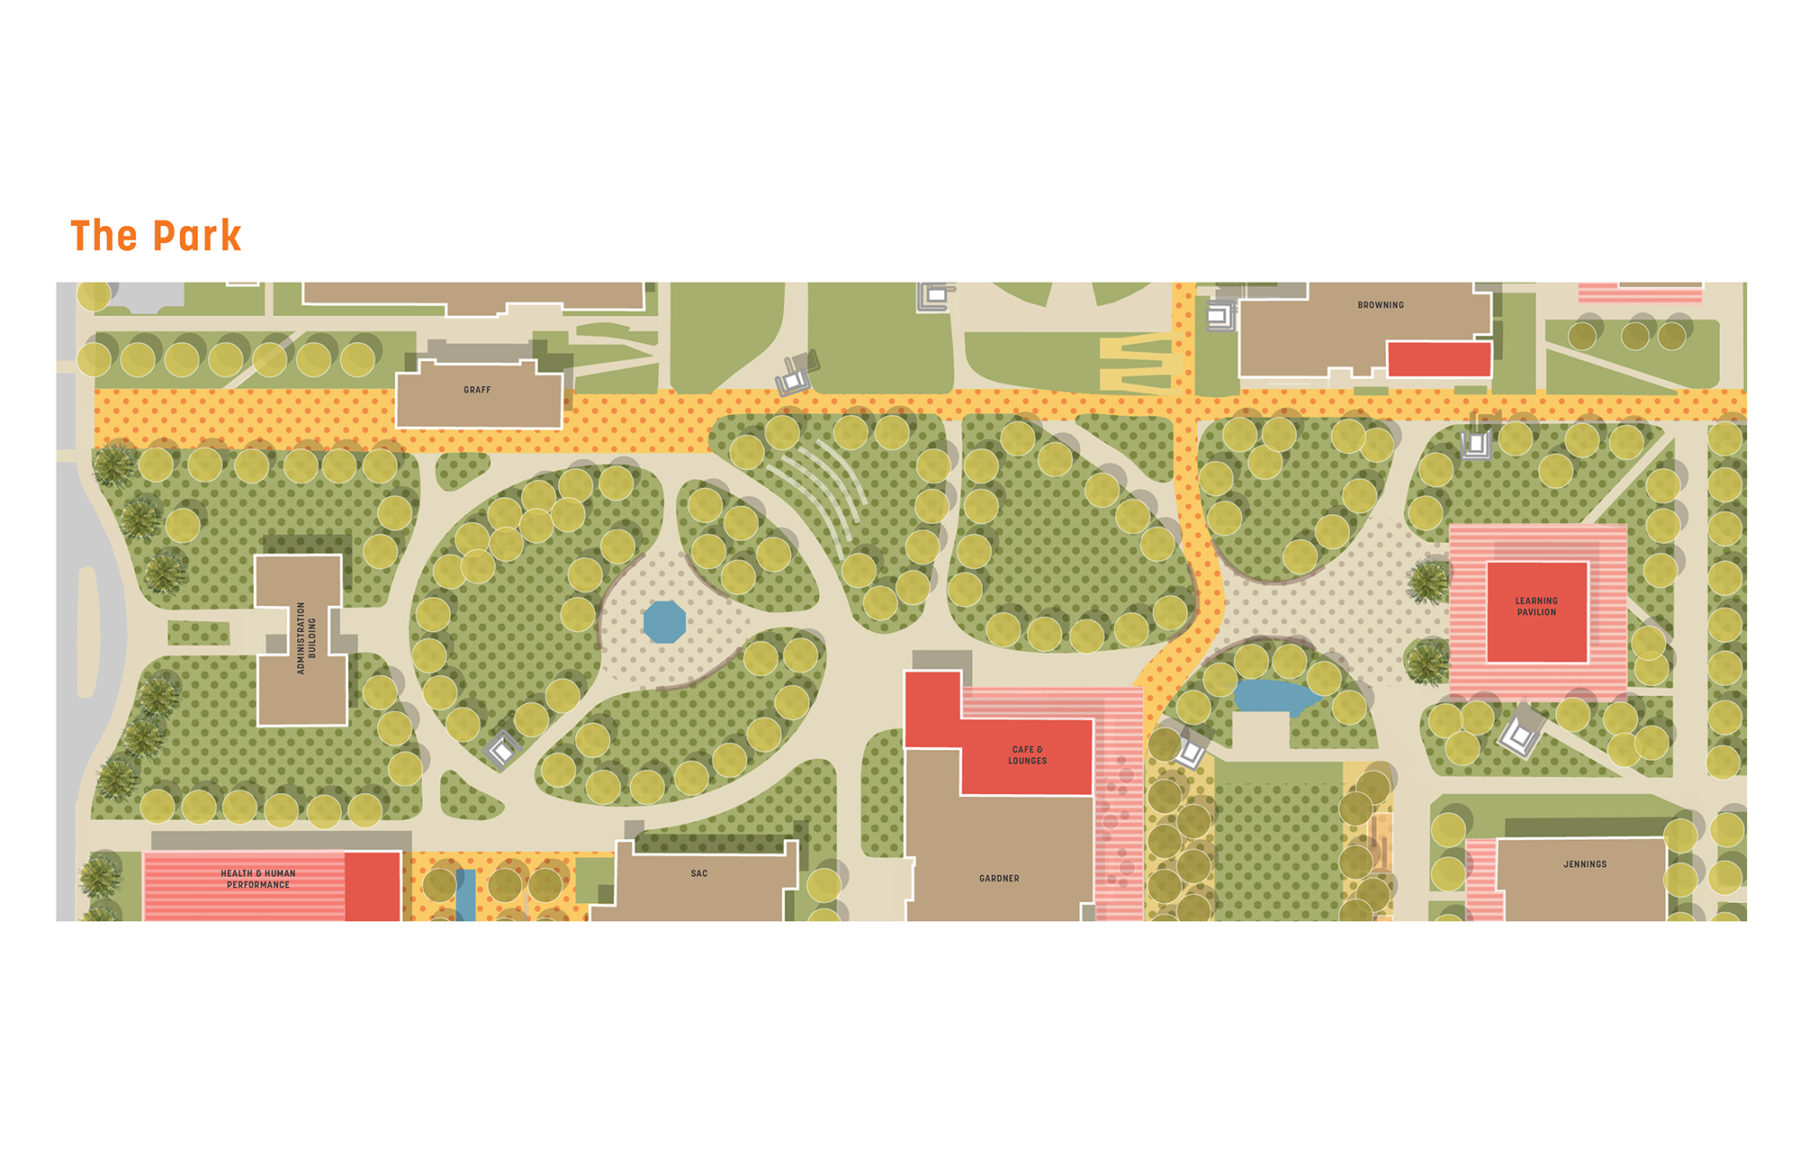 Site plan of the park